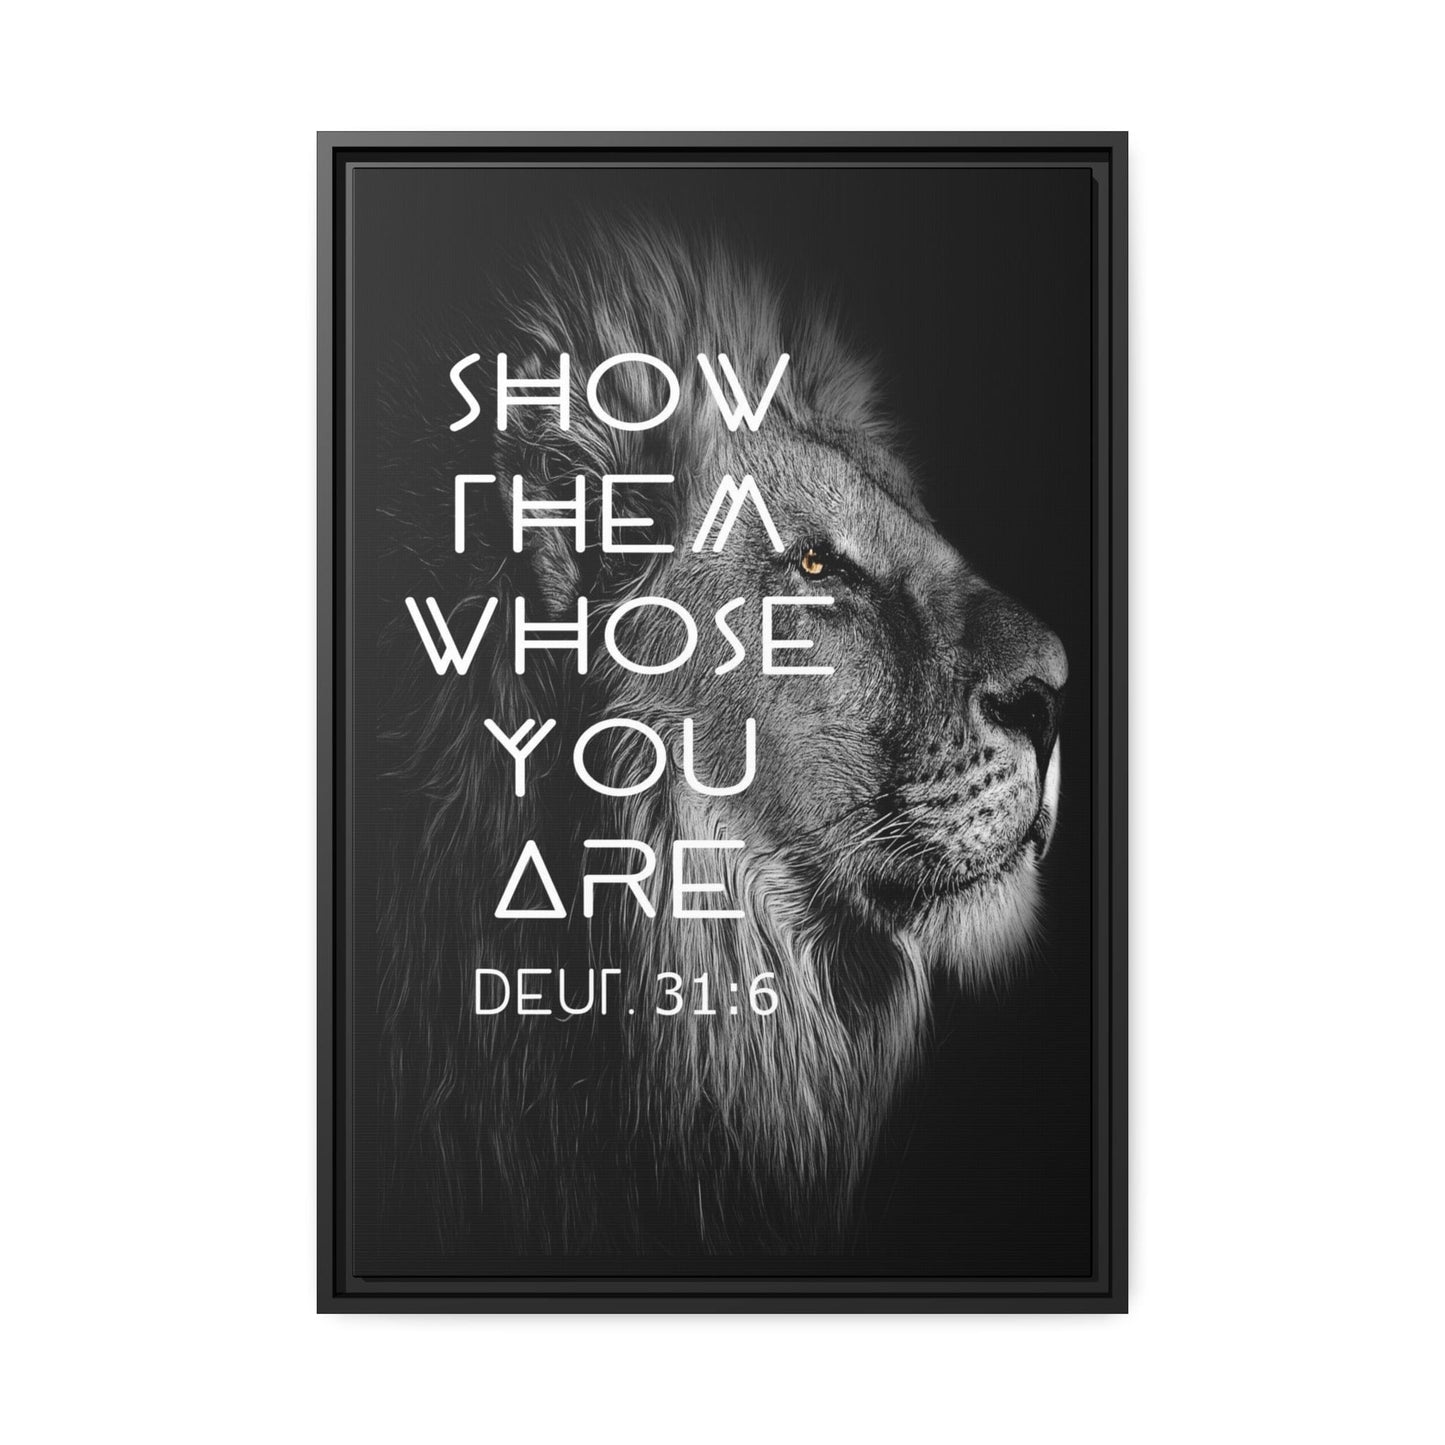 Printify Canvas 20″ x 30″ (Vertical) / Black / 1.25" Show Them Whose You Are - Deuteronomy 31:6 Christian Canvas Wall Art